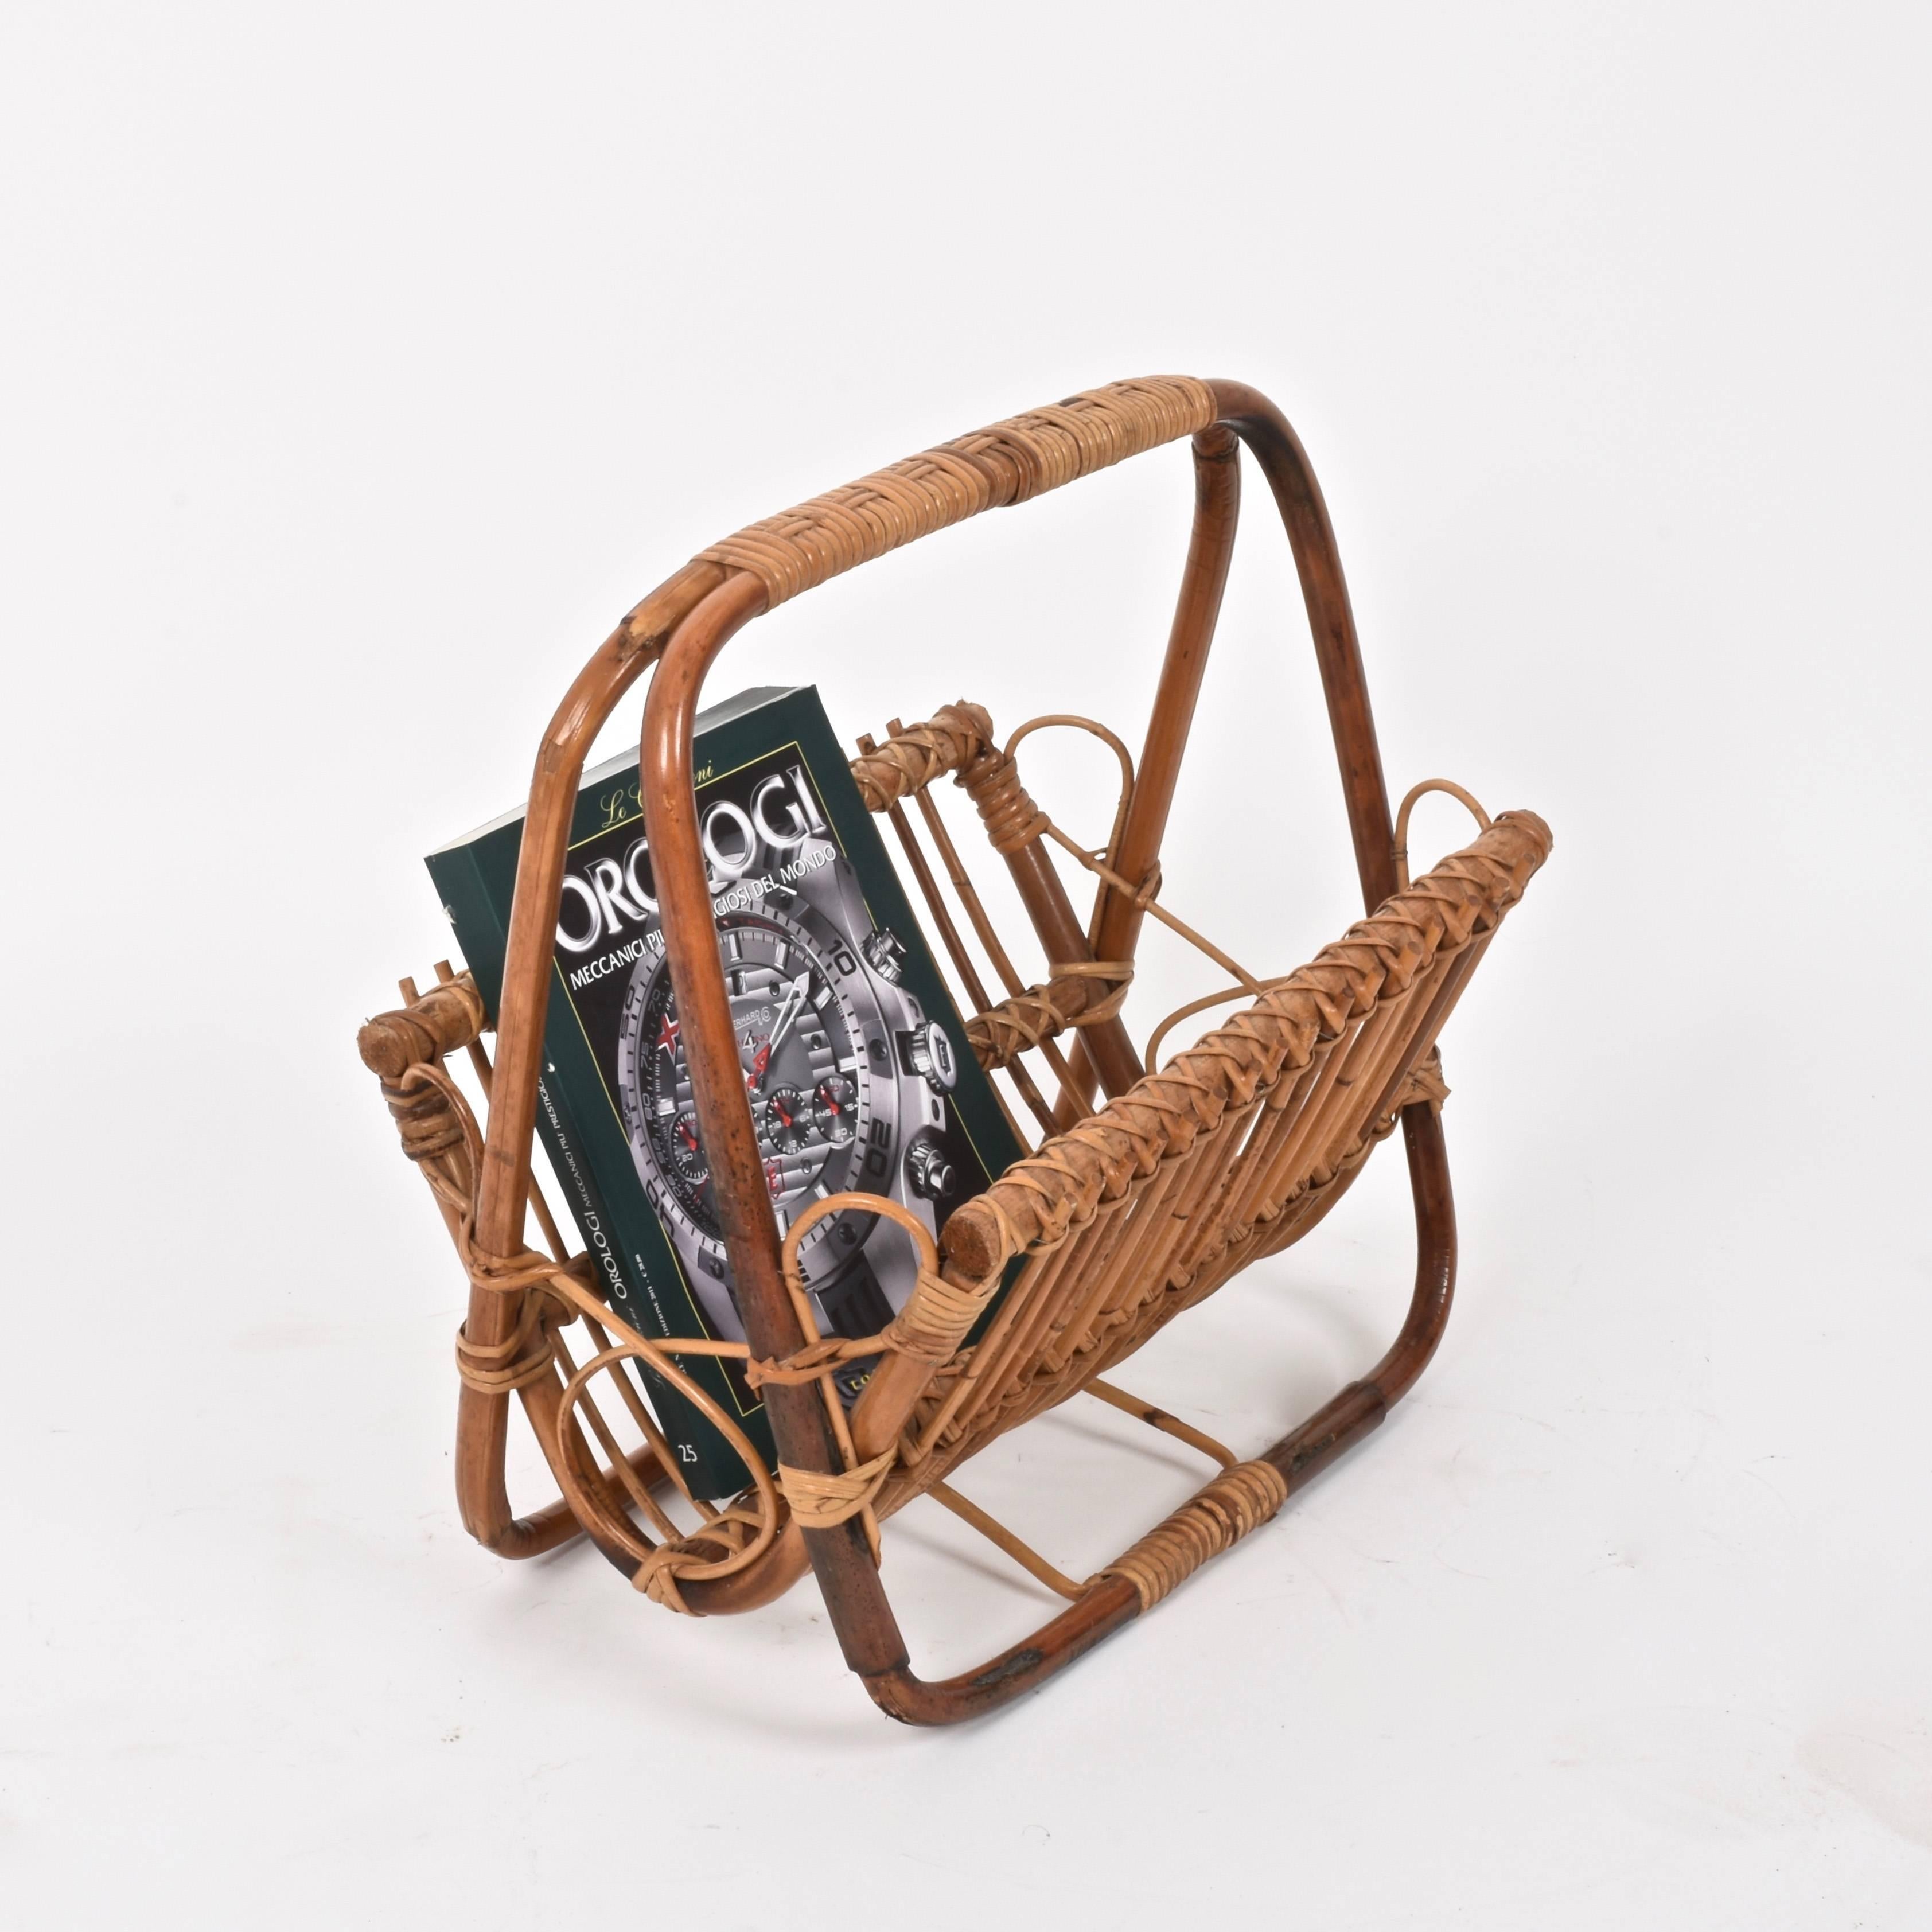 Midcentury French riviera bamboo and rattan magazine rack.

This amazing item was produced in Italy during the 1960s.

This piece is perfect for a midcentury-style library or a studio.